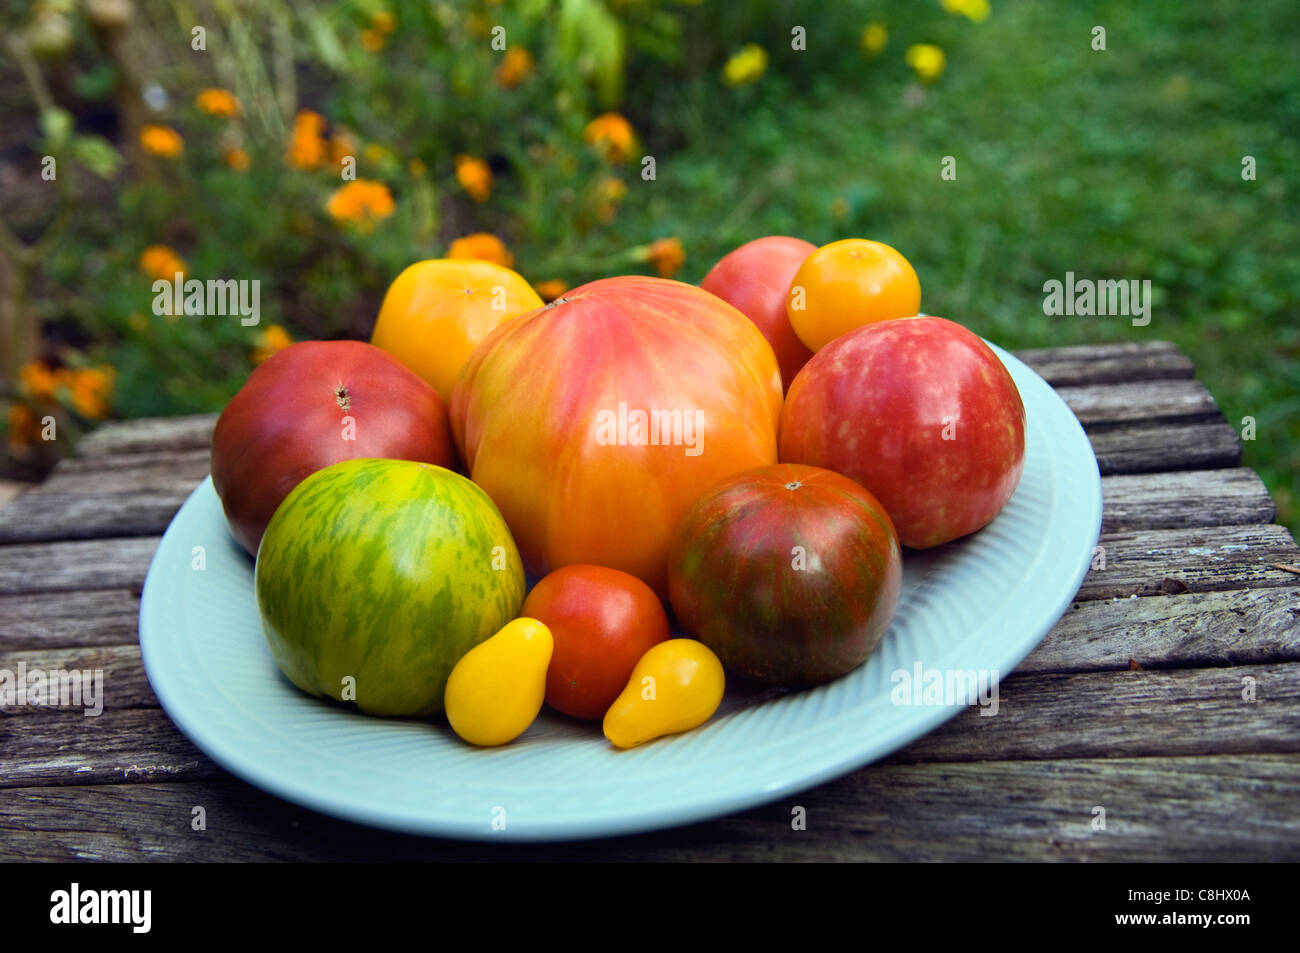 Different Varieties of Heirloom Tomatoes on Plate in Garden Stock Photo